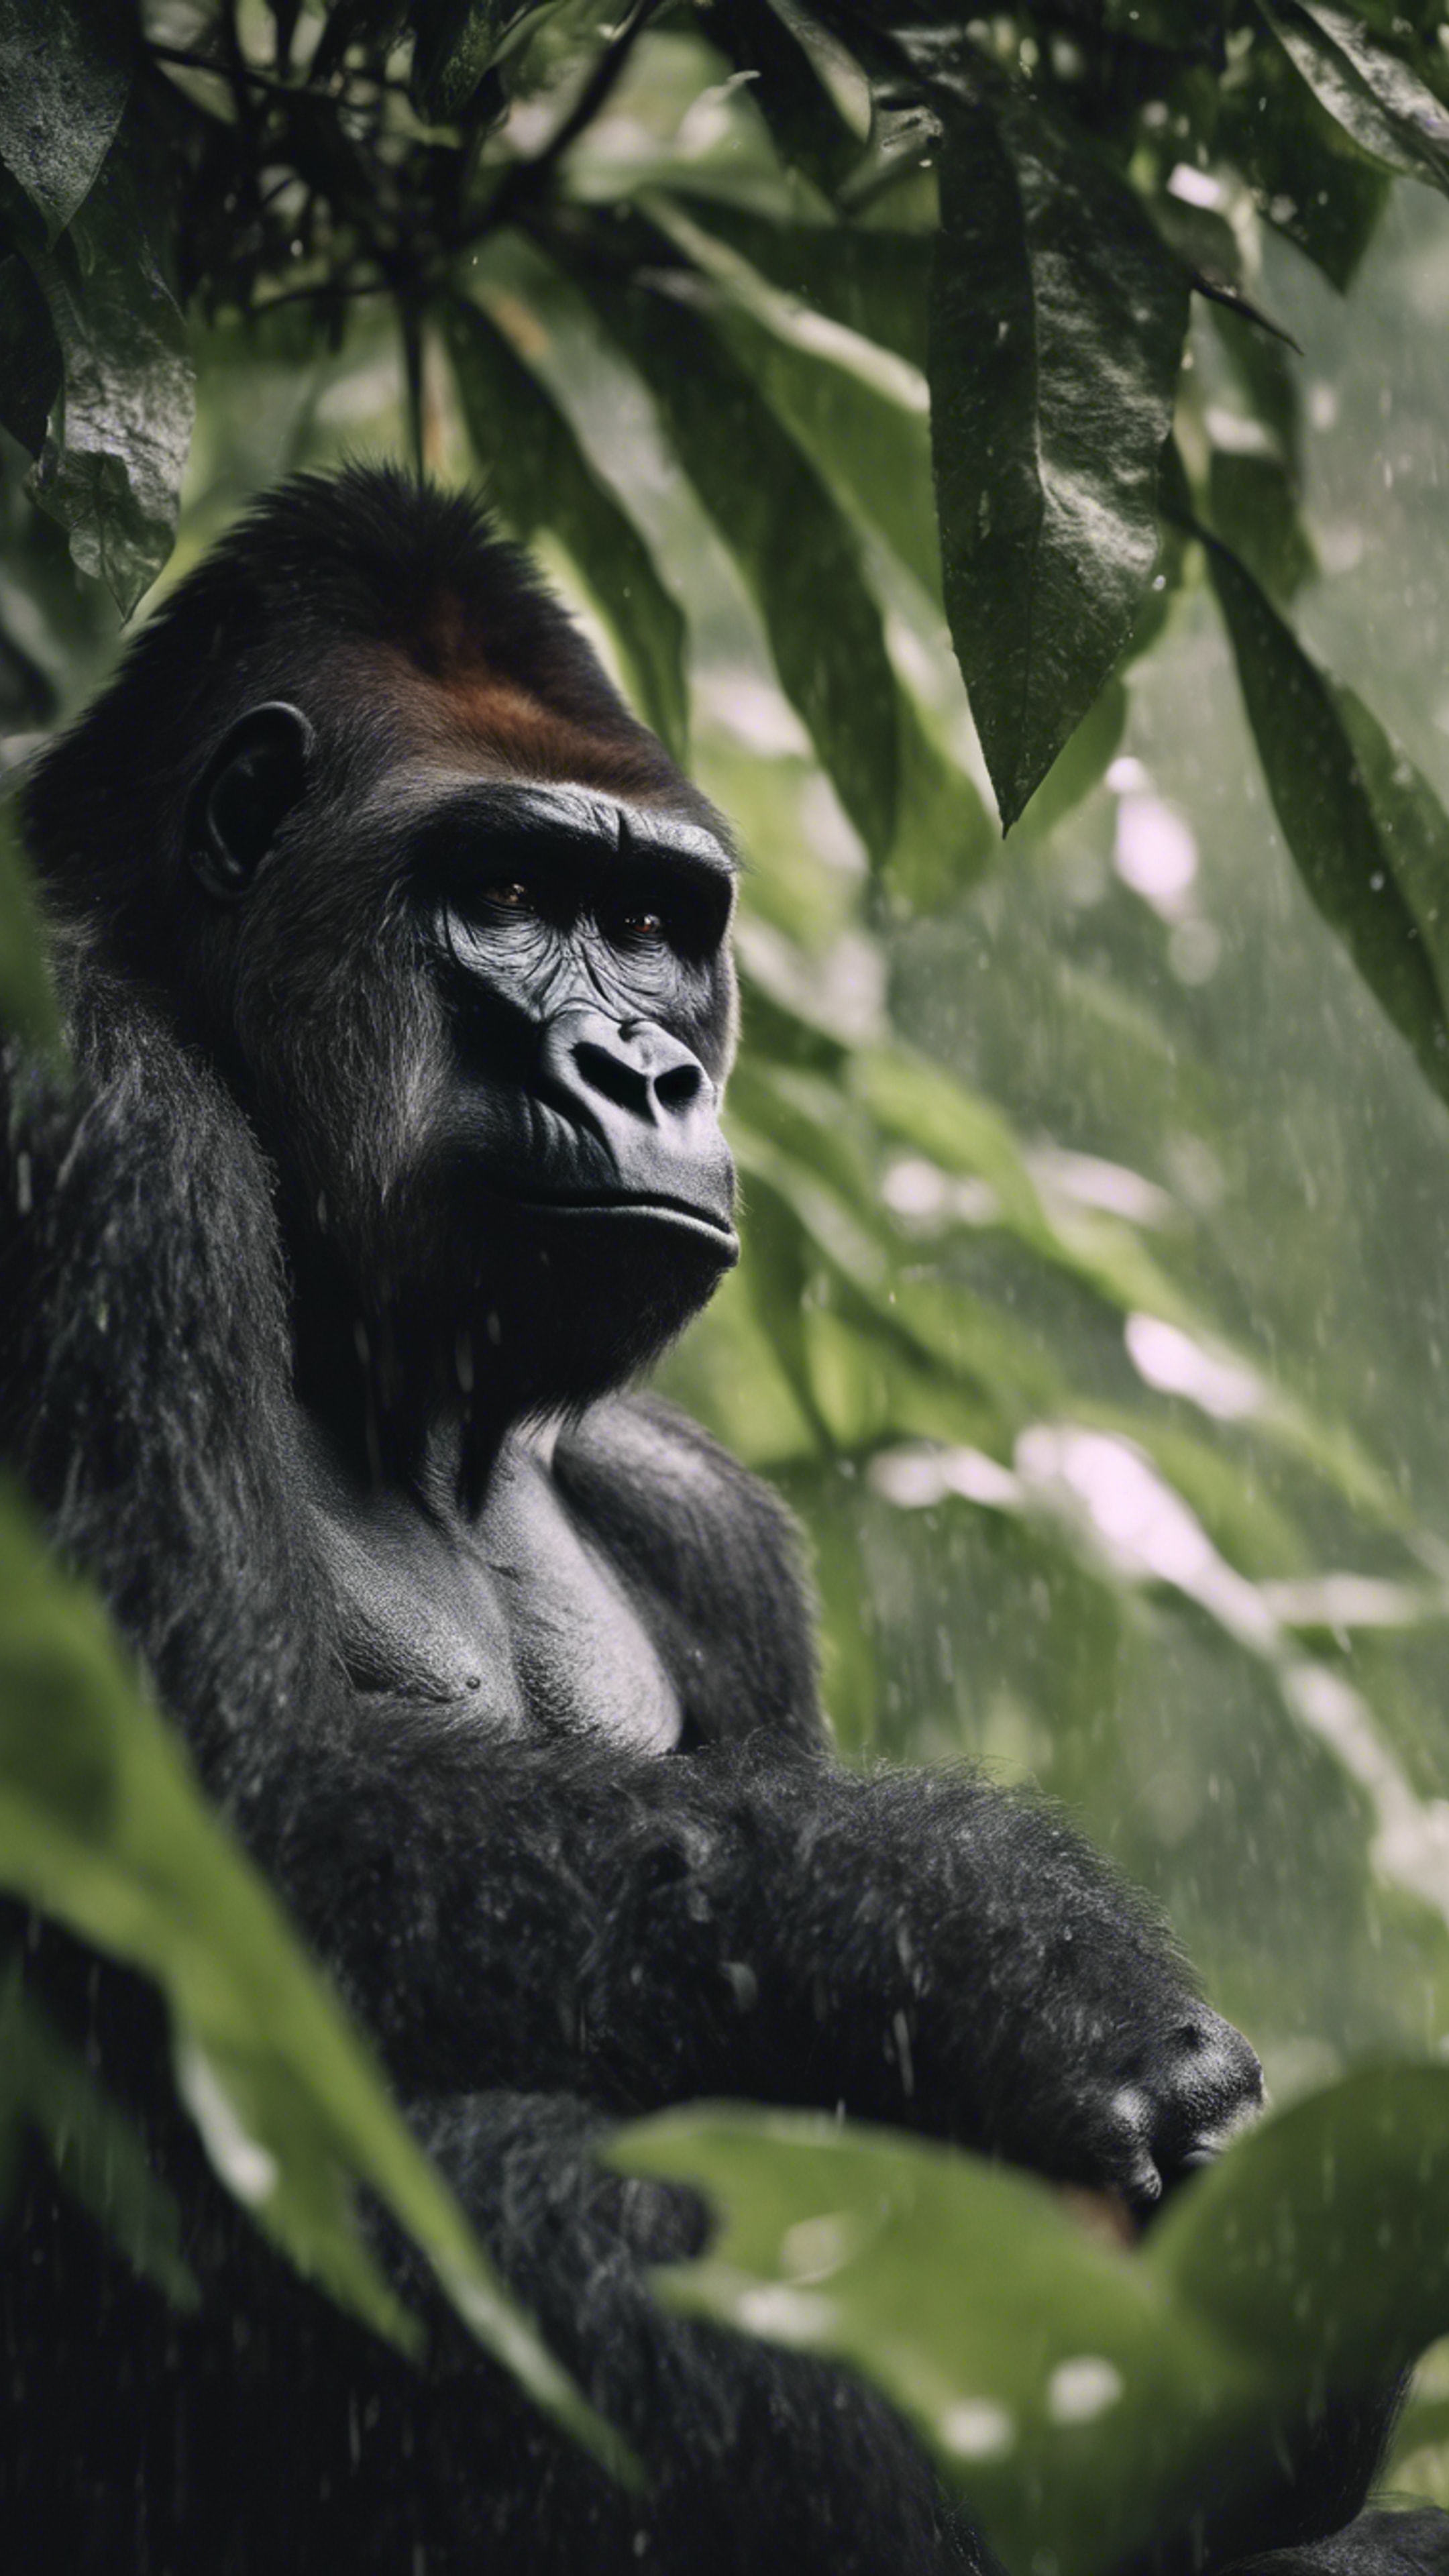 A sad gorilla on a rainy day, gazing out from under the shelter of giant leaves. کاغذ دیواری[ce7c66a51f504b8e8f6d]